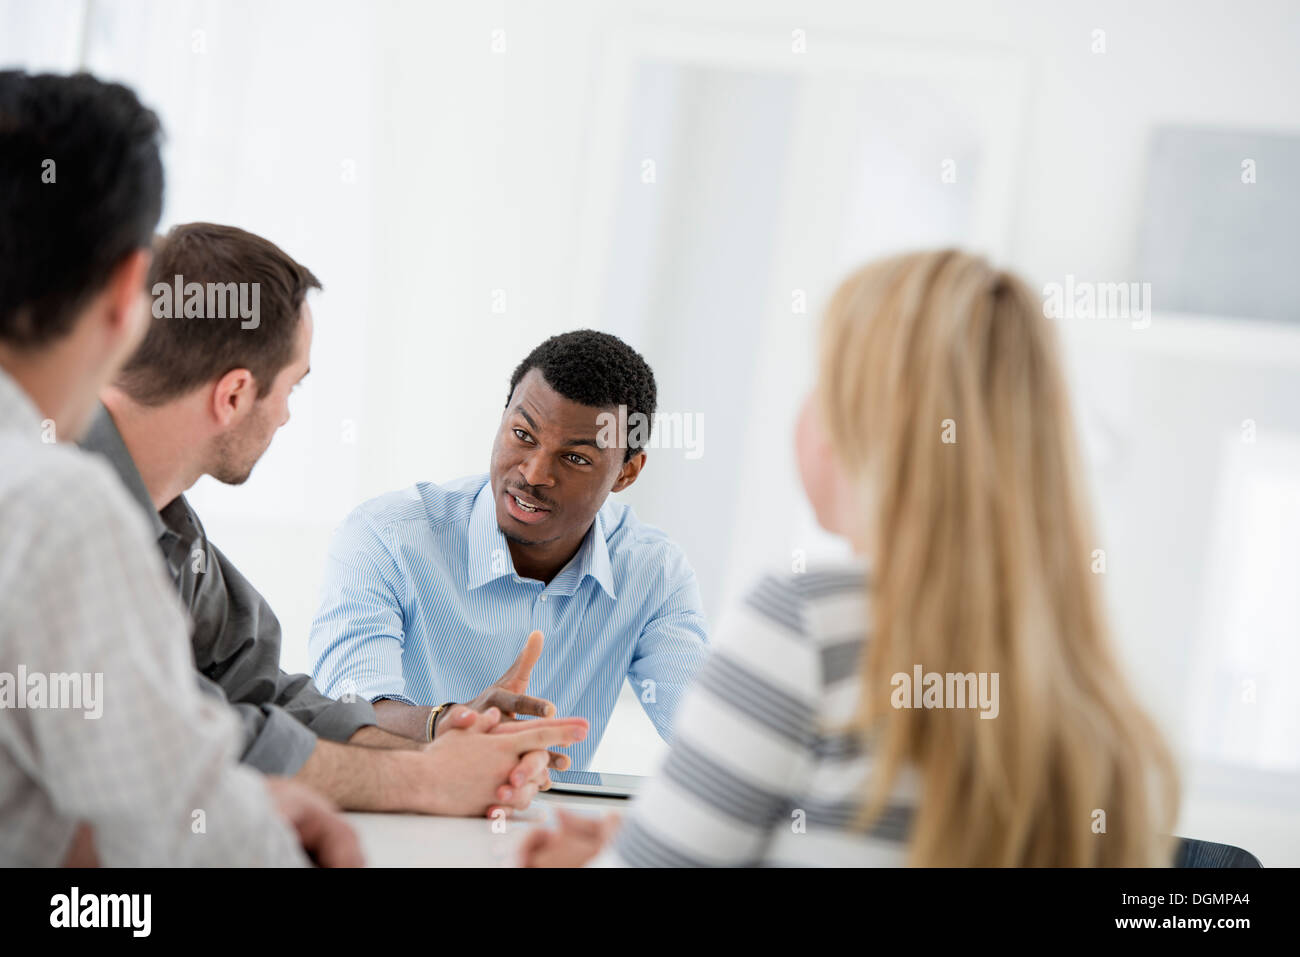 Office interior. A group of four people, One woman and three men. Stock Photo